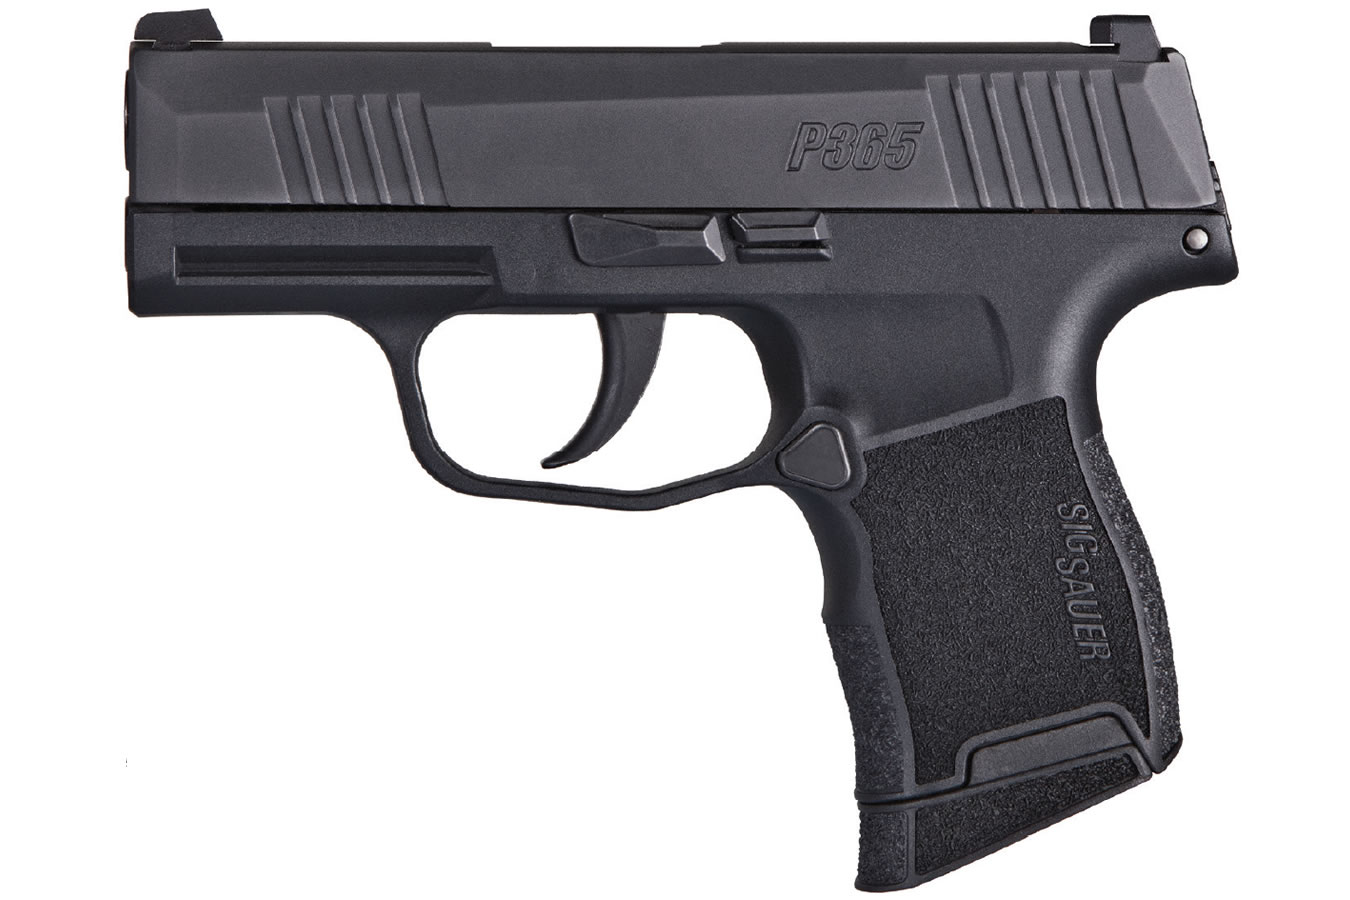 P365 9MM MICRO COMPACT PISTOL 1 MAG